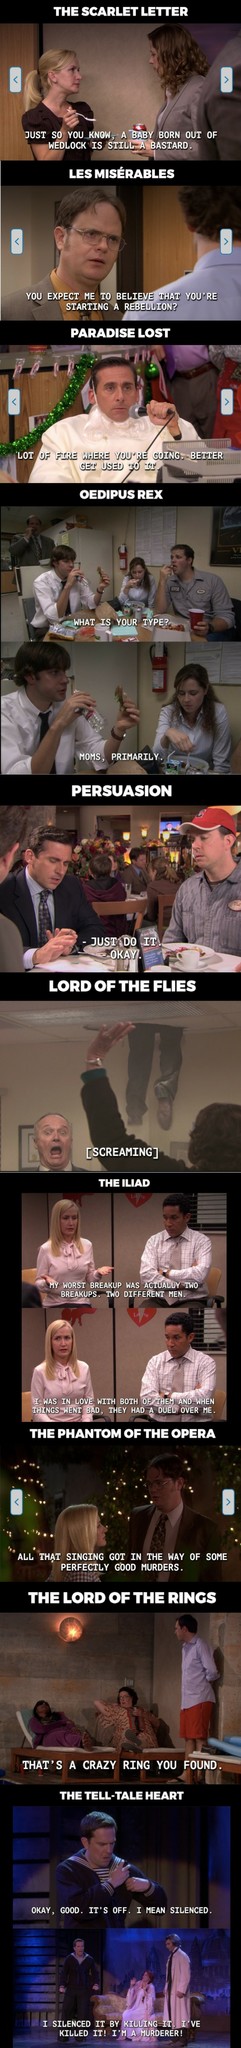 Every Book In A Typical English Syllabus Summed Up In A Quote From The Office - Part 1 - meme